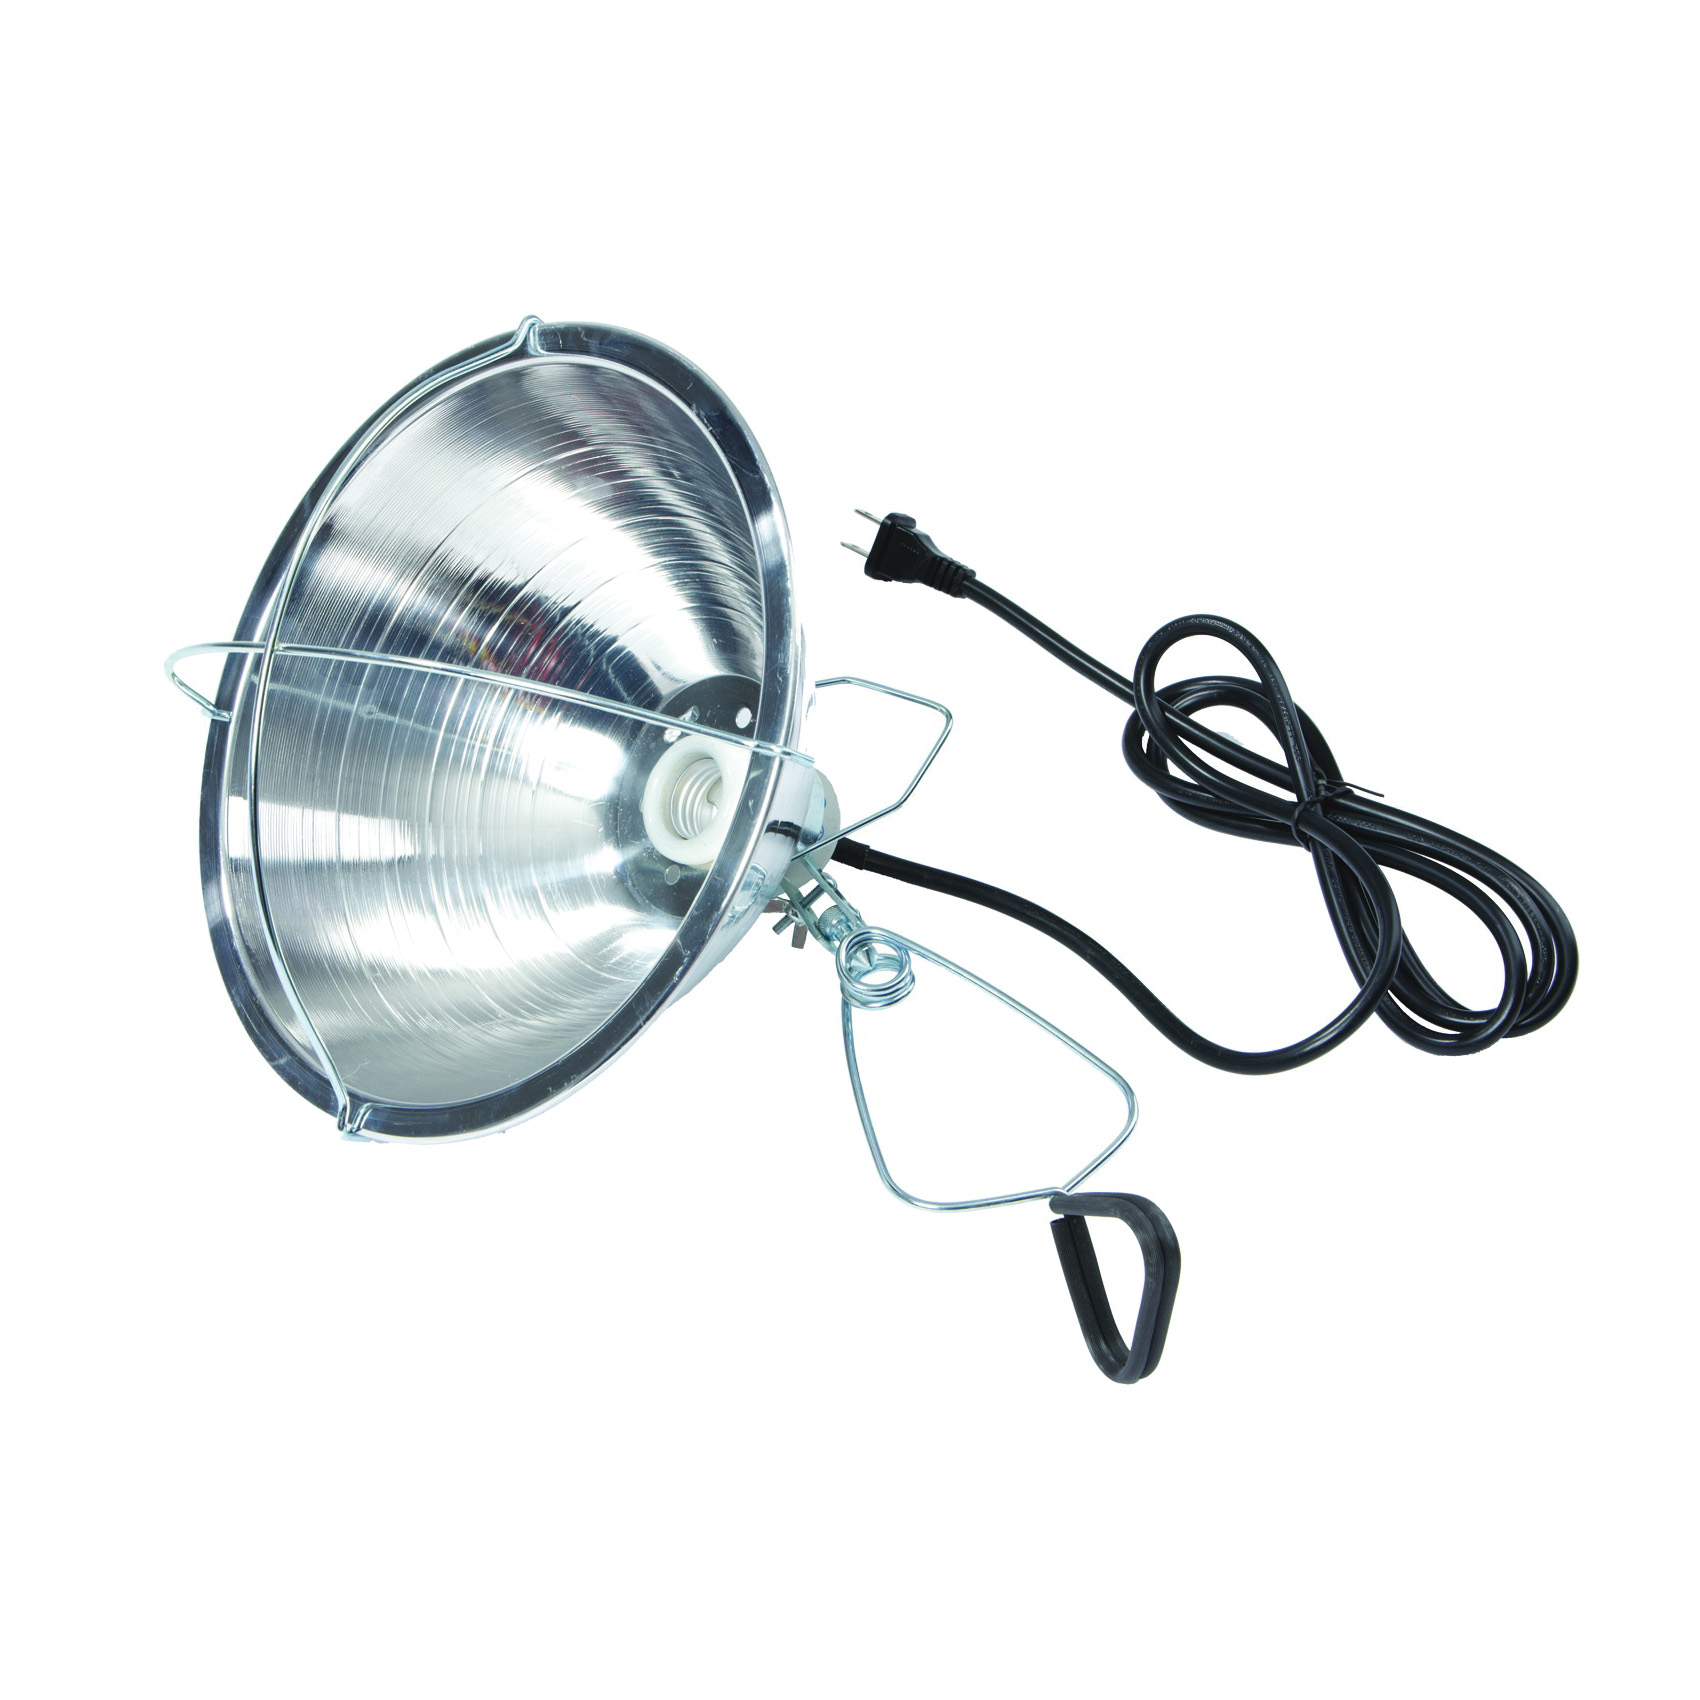 Little Giant 170017 Brooder Reflector Lamp, 300 W - 1